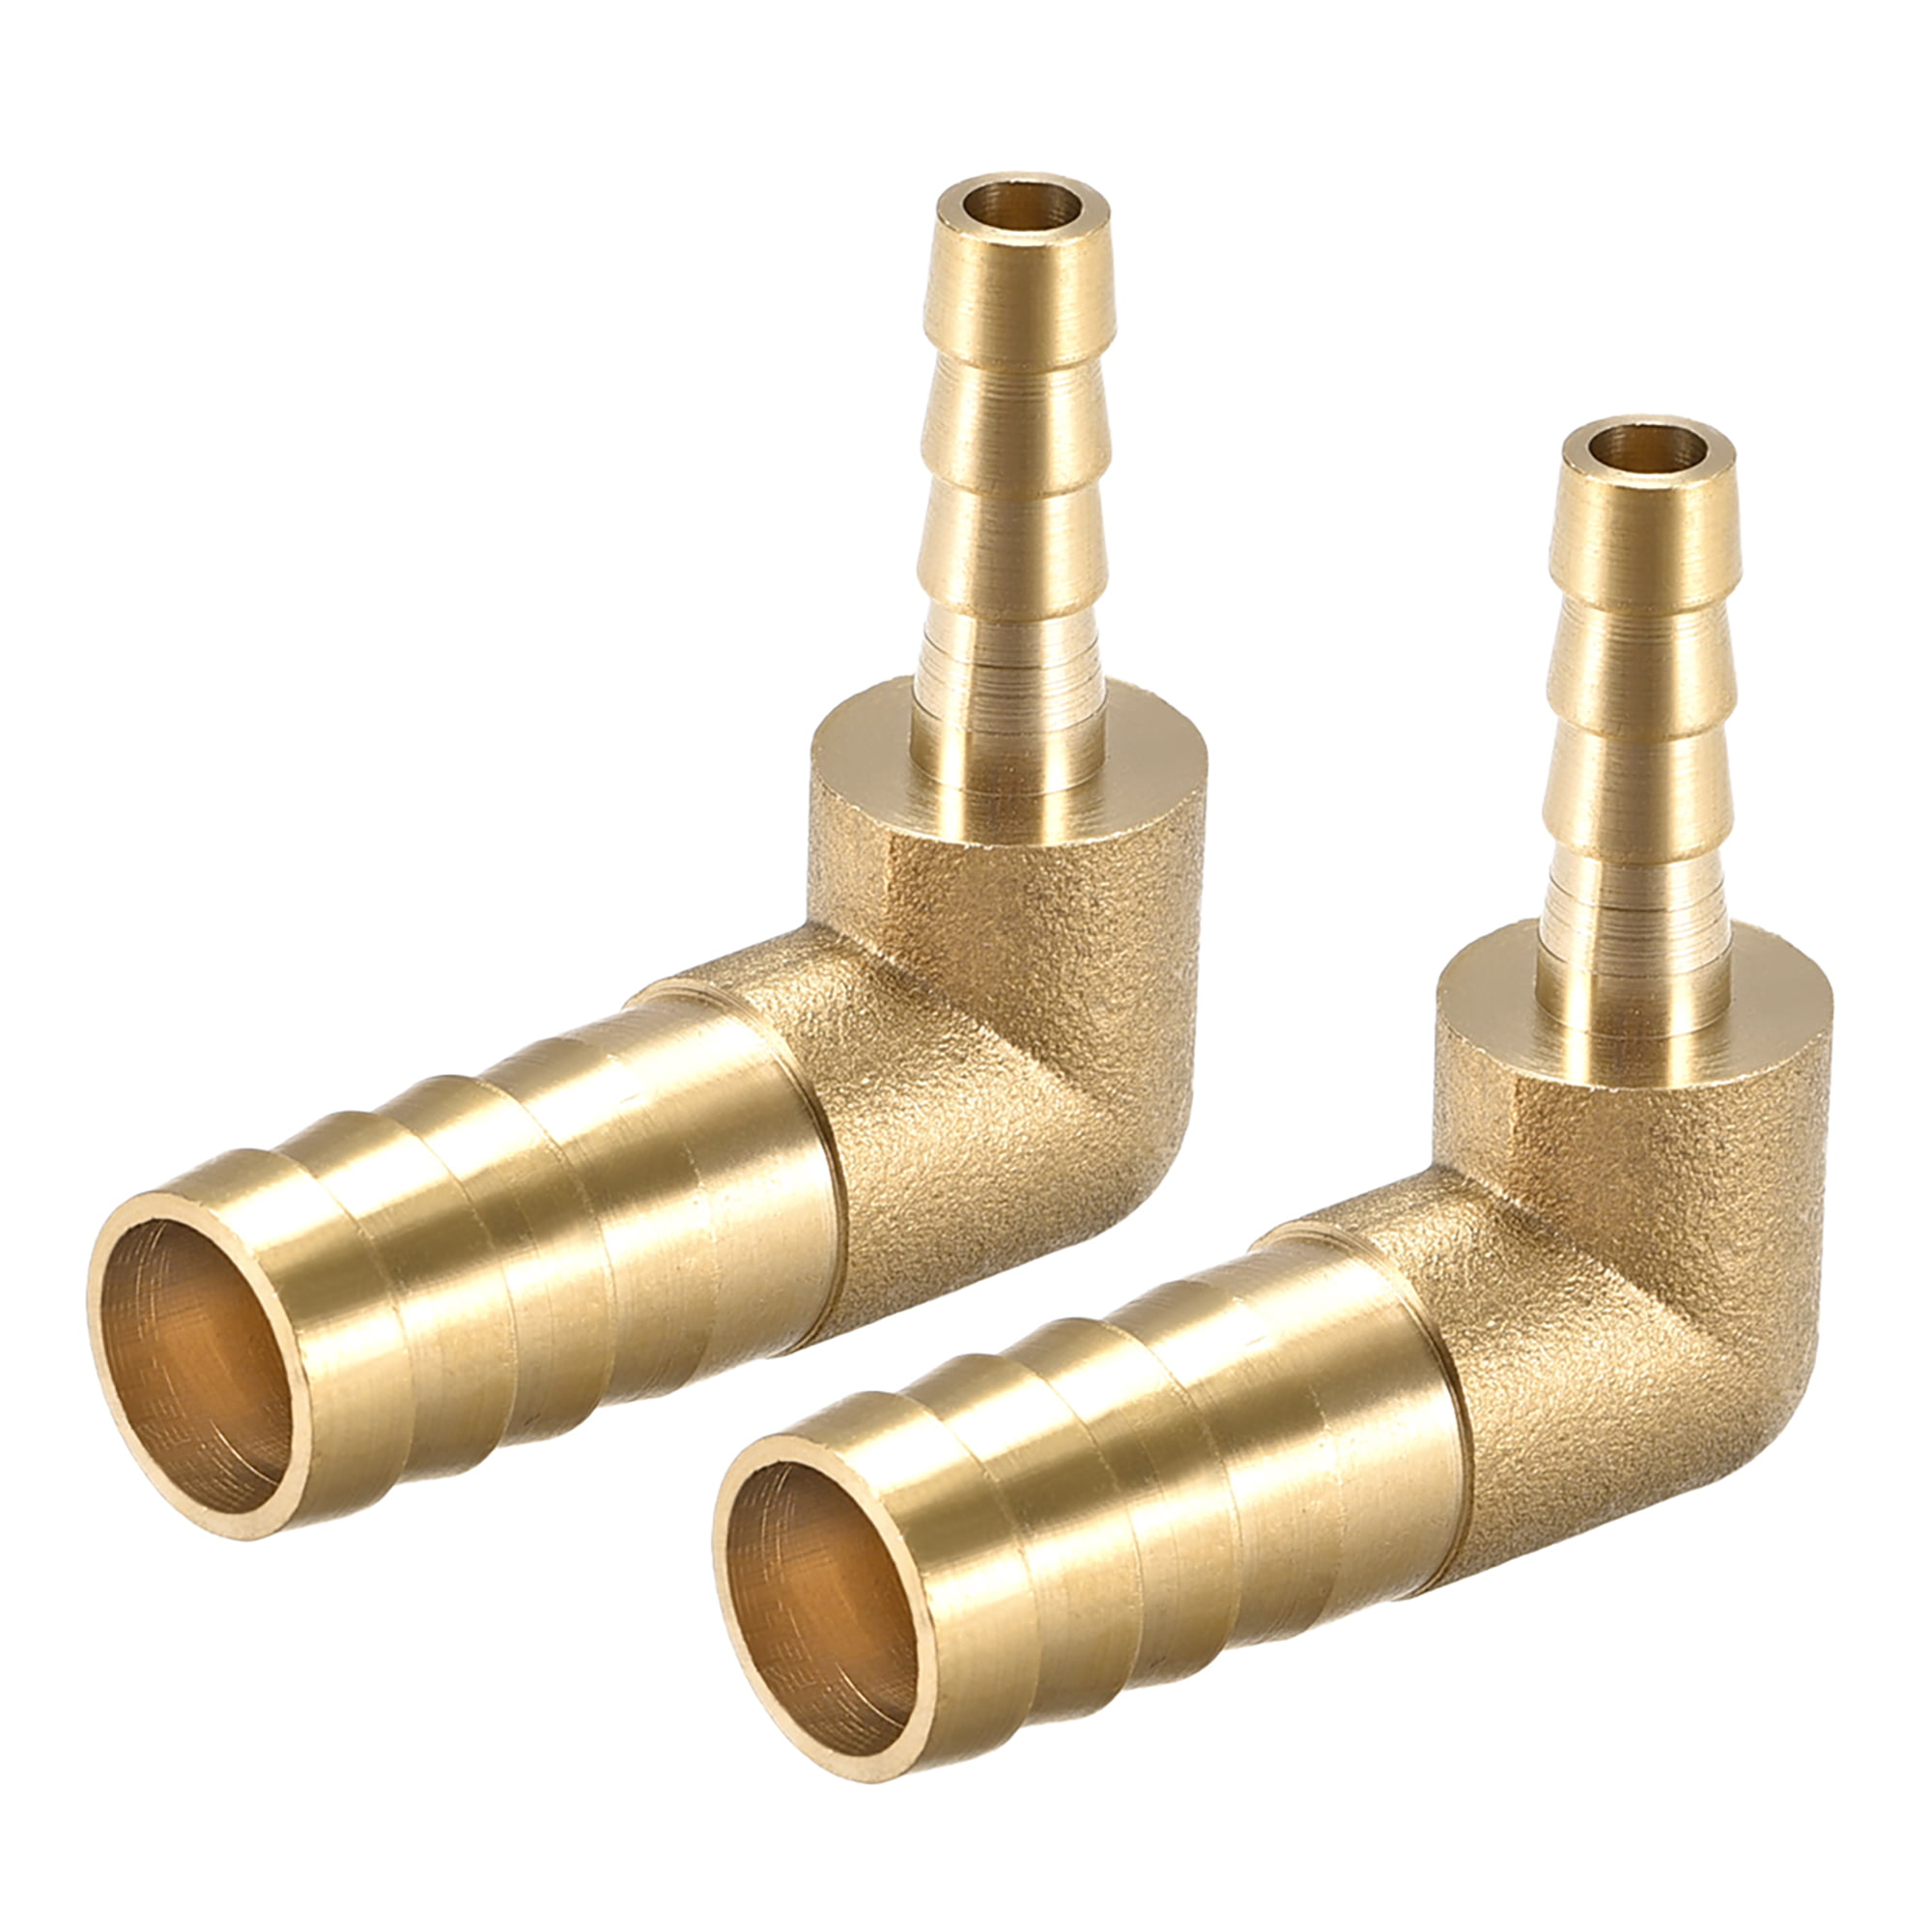 Joywayus 3/8 to 5/32 Reducer Hose ID Barb 90 Degree L Right Angle Elbow Union Brass Fitting Water/Fuel/Air